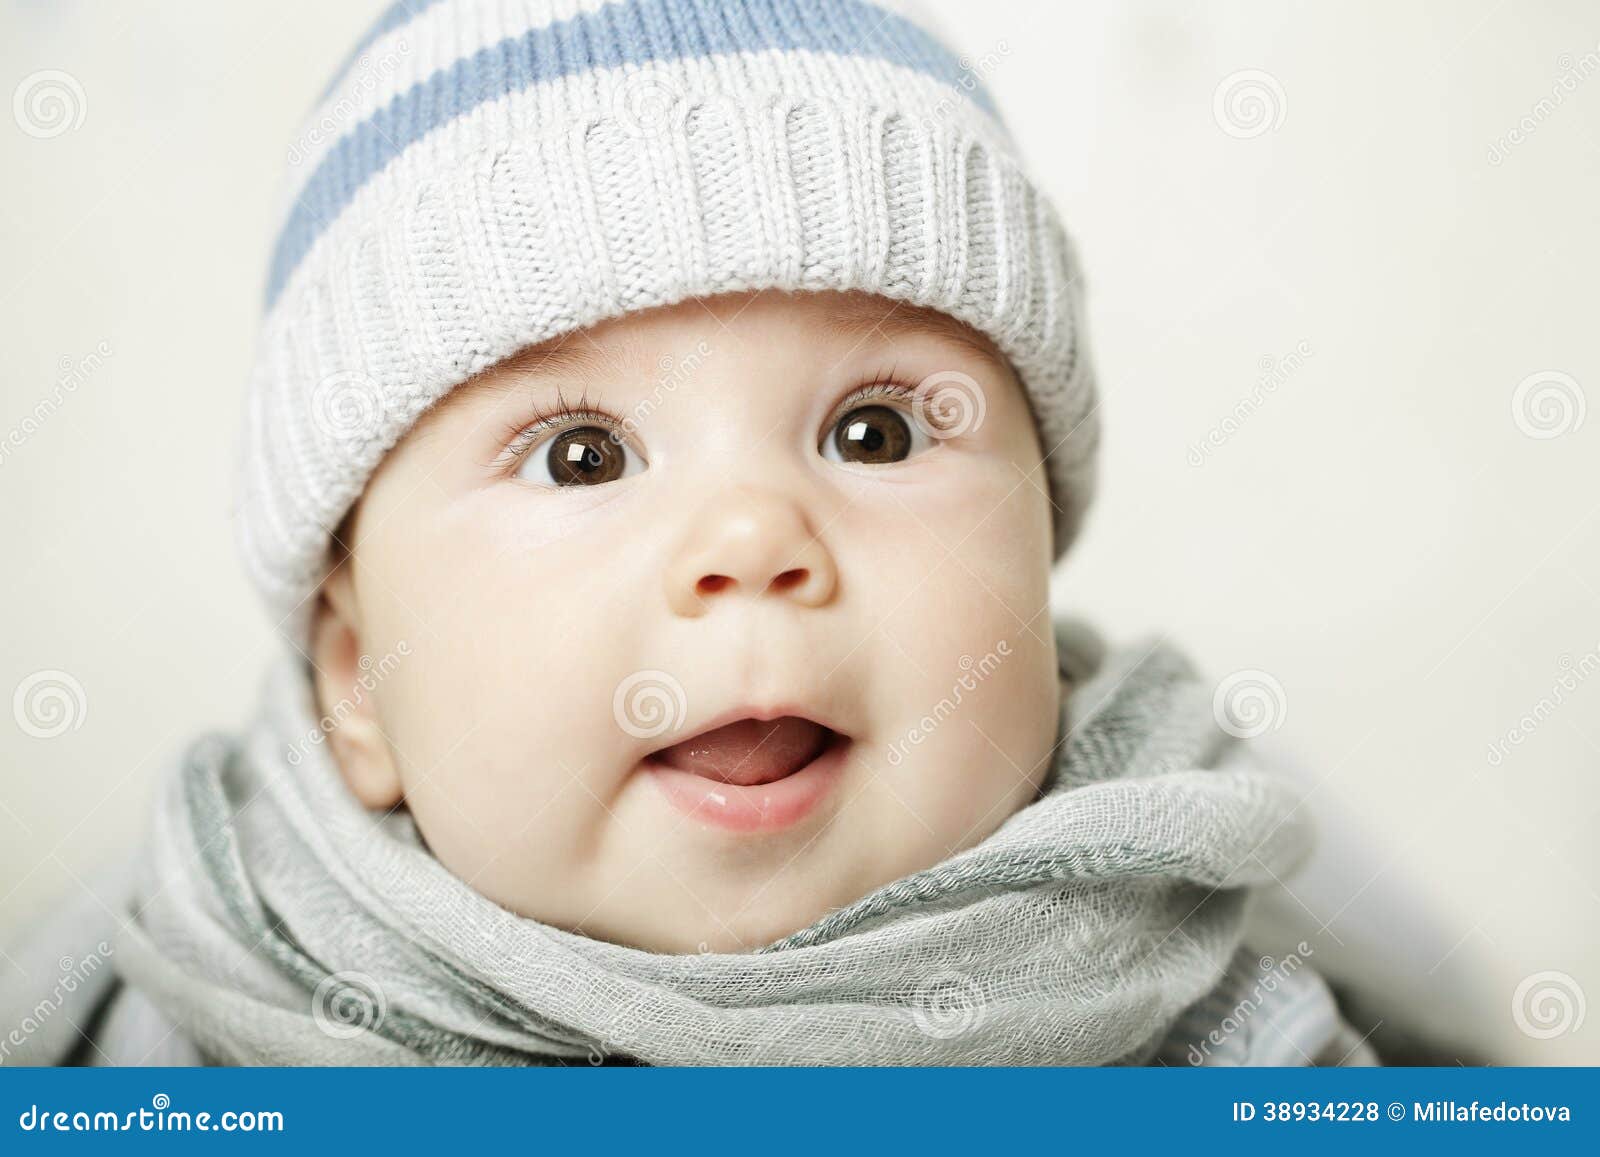 Surprised baby stock photo. Image of face, child, color - 38934228